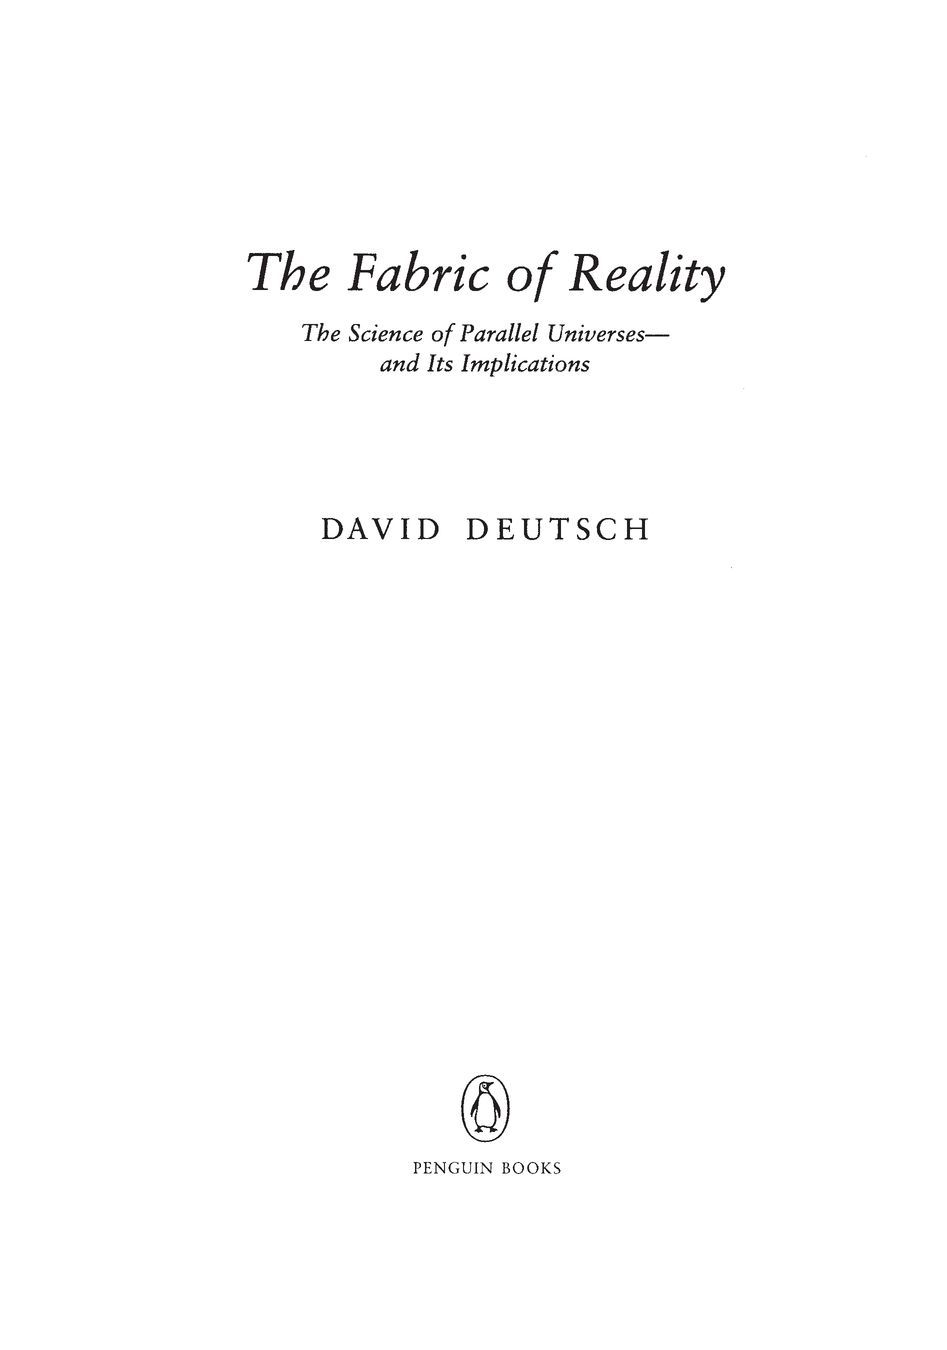 Table of Contents PENGUIN BOOKS THE FABRIC OF REALITY Born in Haifa Israel - photo 1